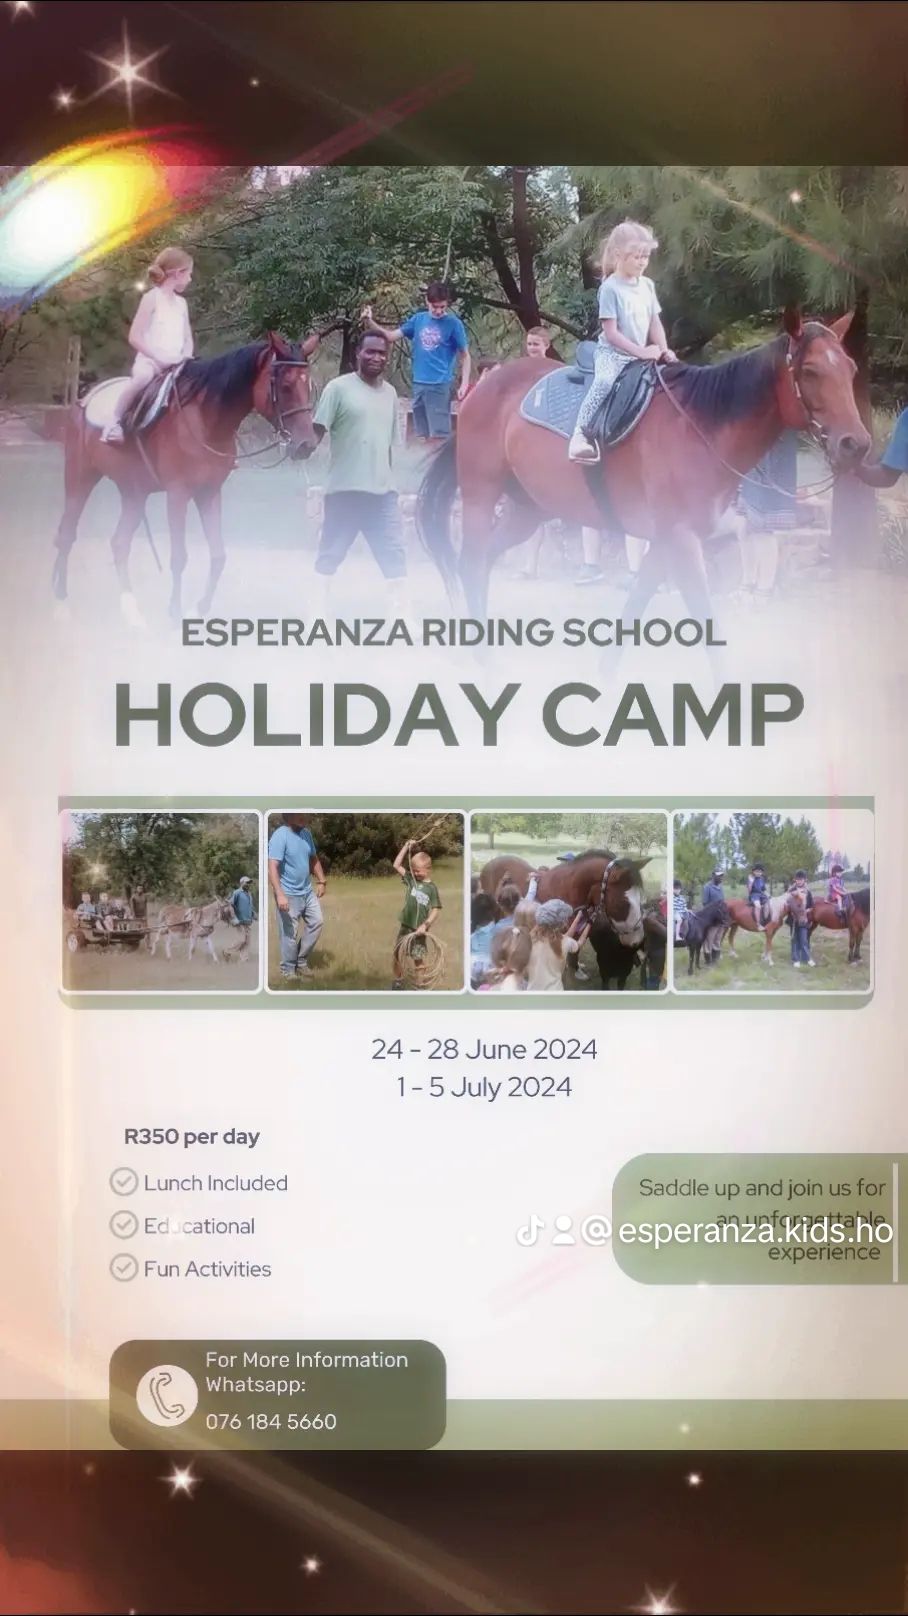 Holiday camp and activities for kids in Pretoria